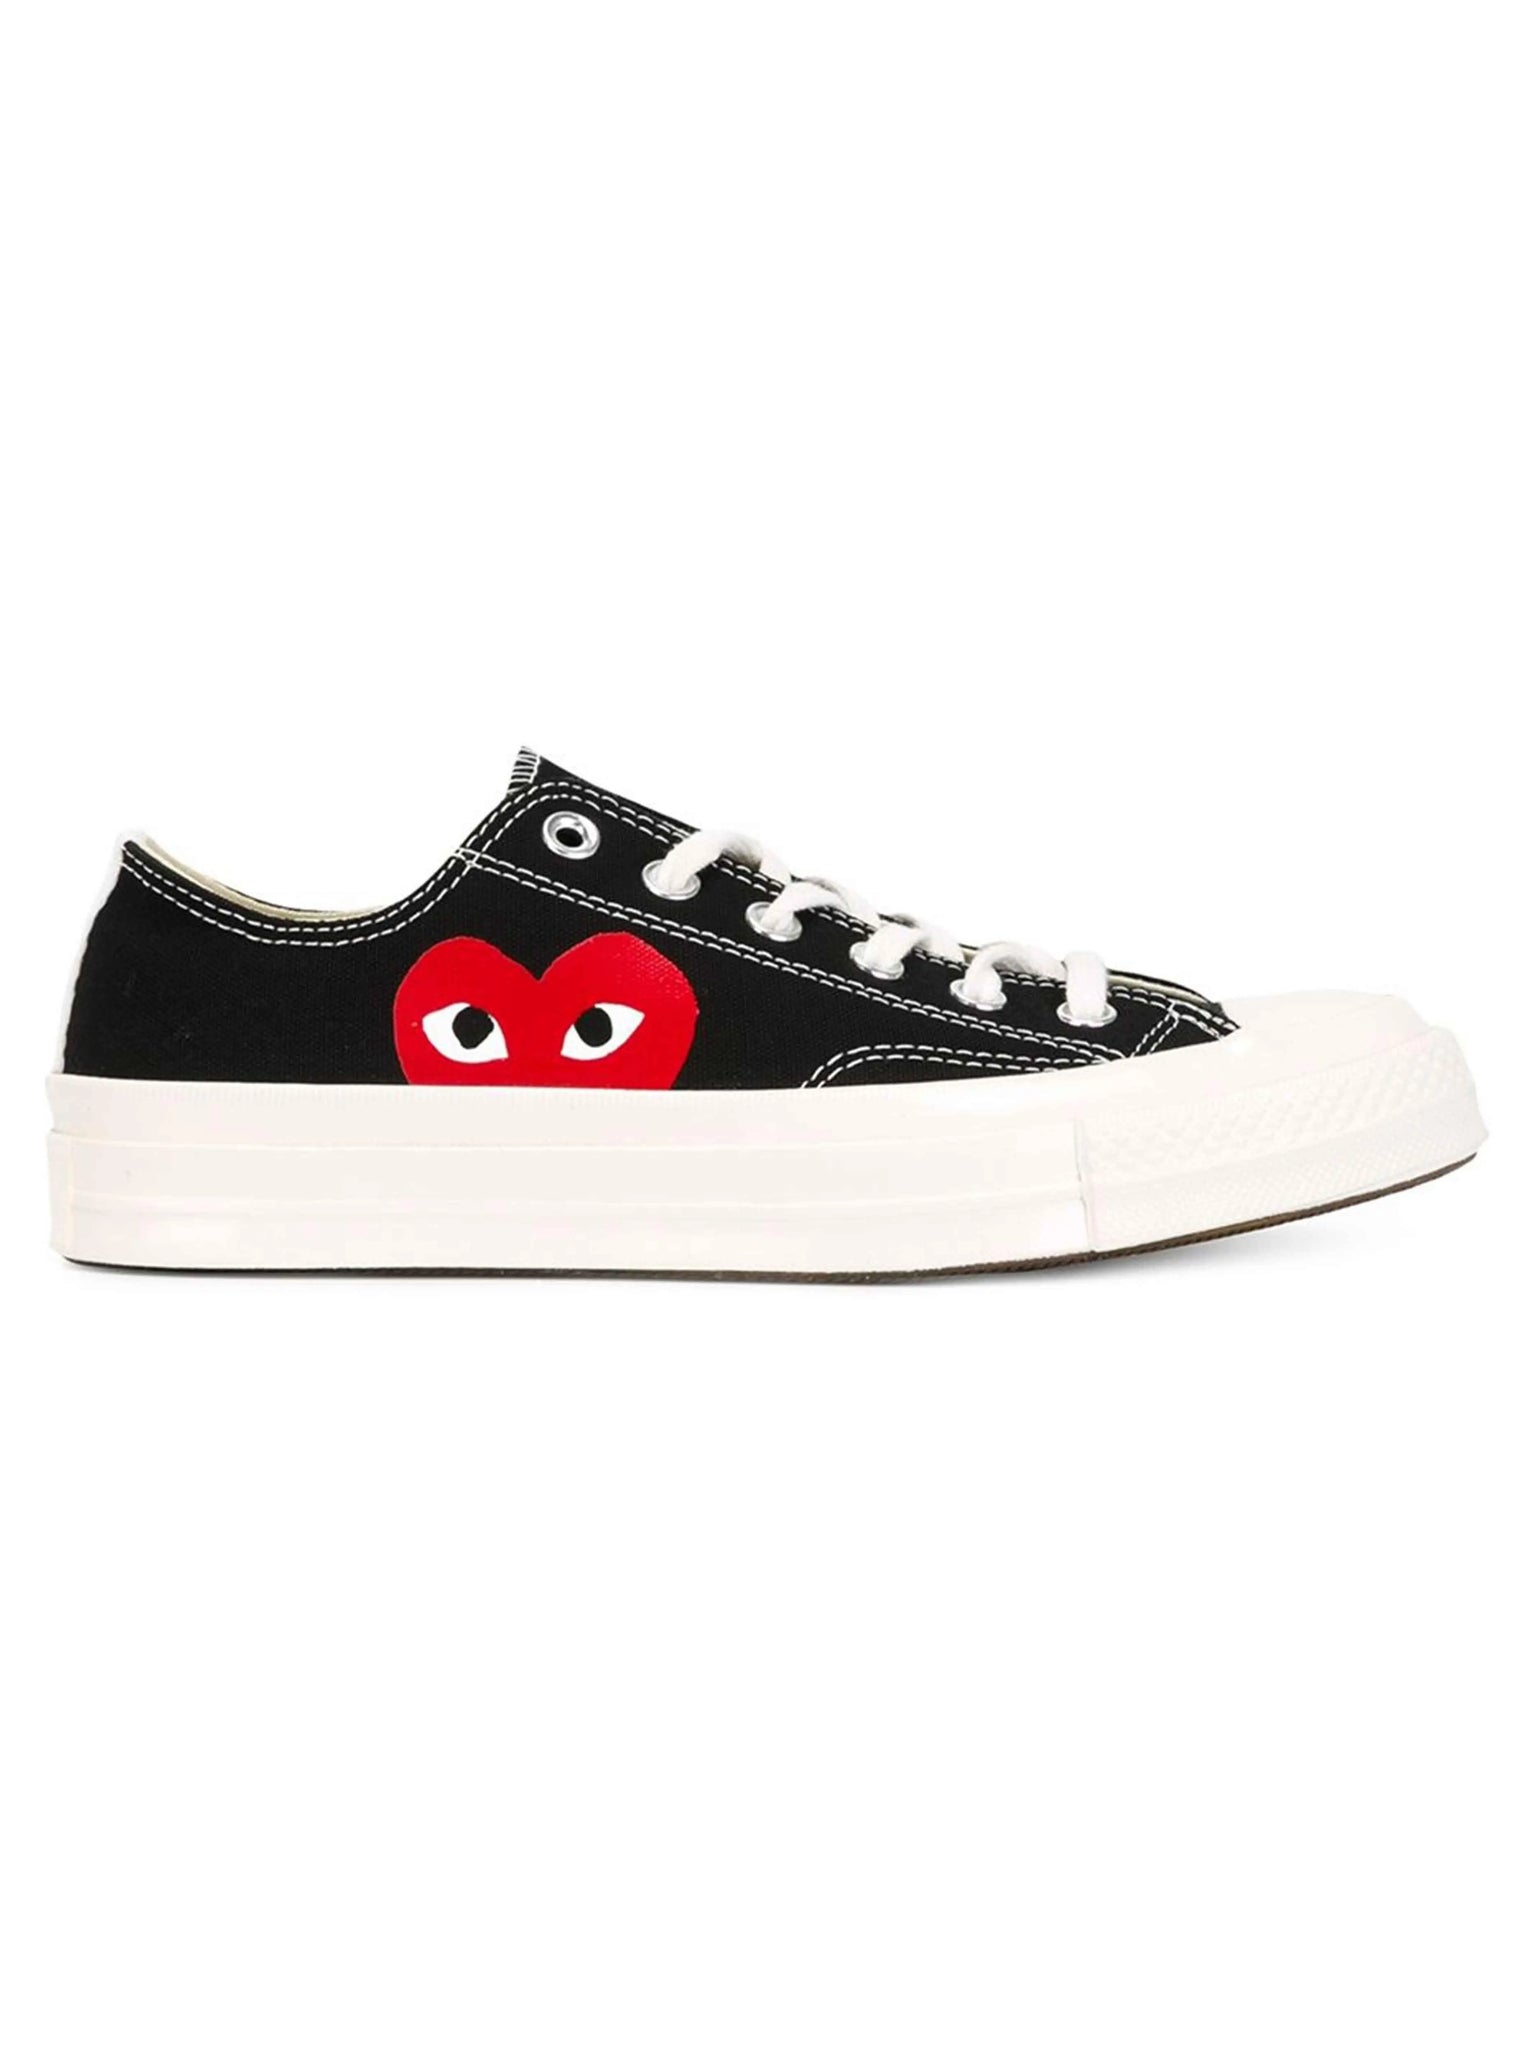 Converse X CDG Chuck Taylor All-Star 70s Low Black Prior